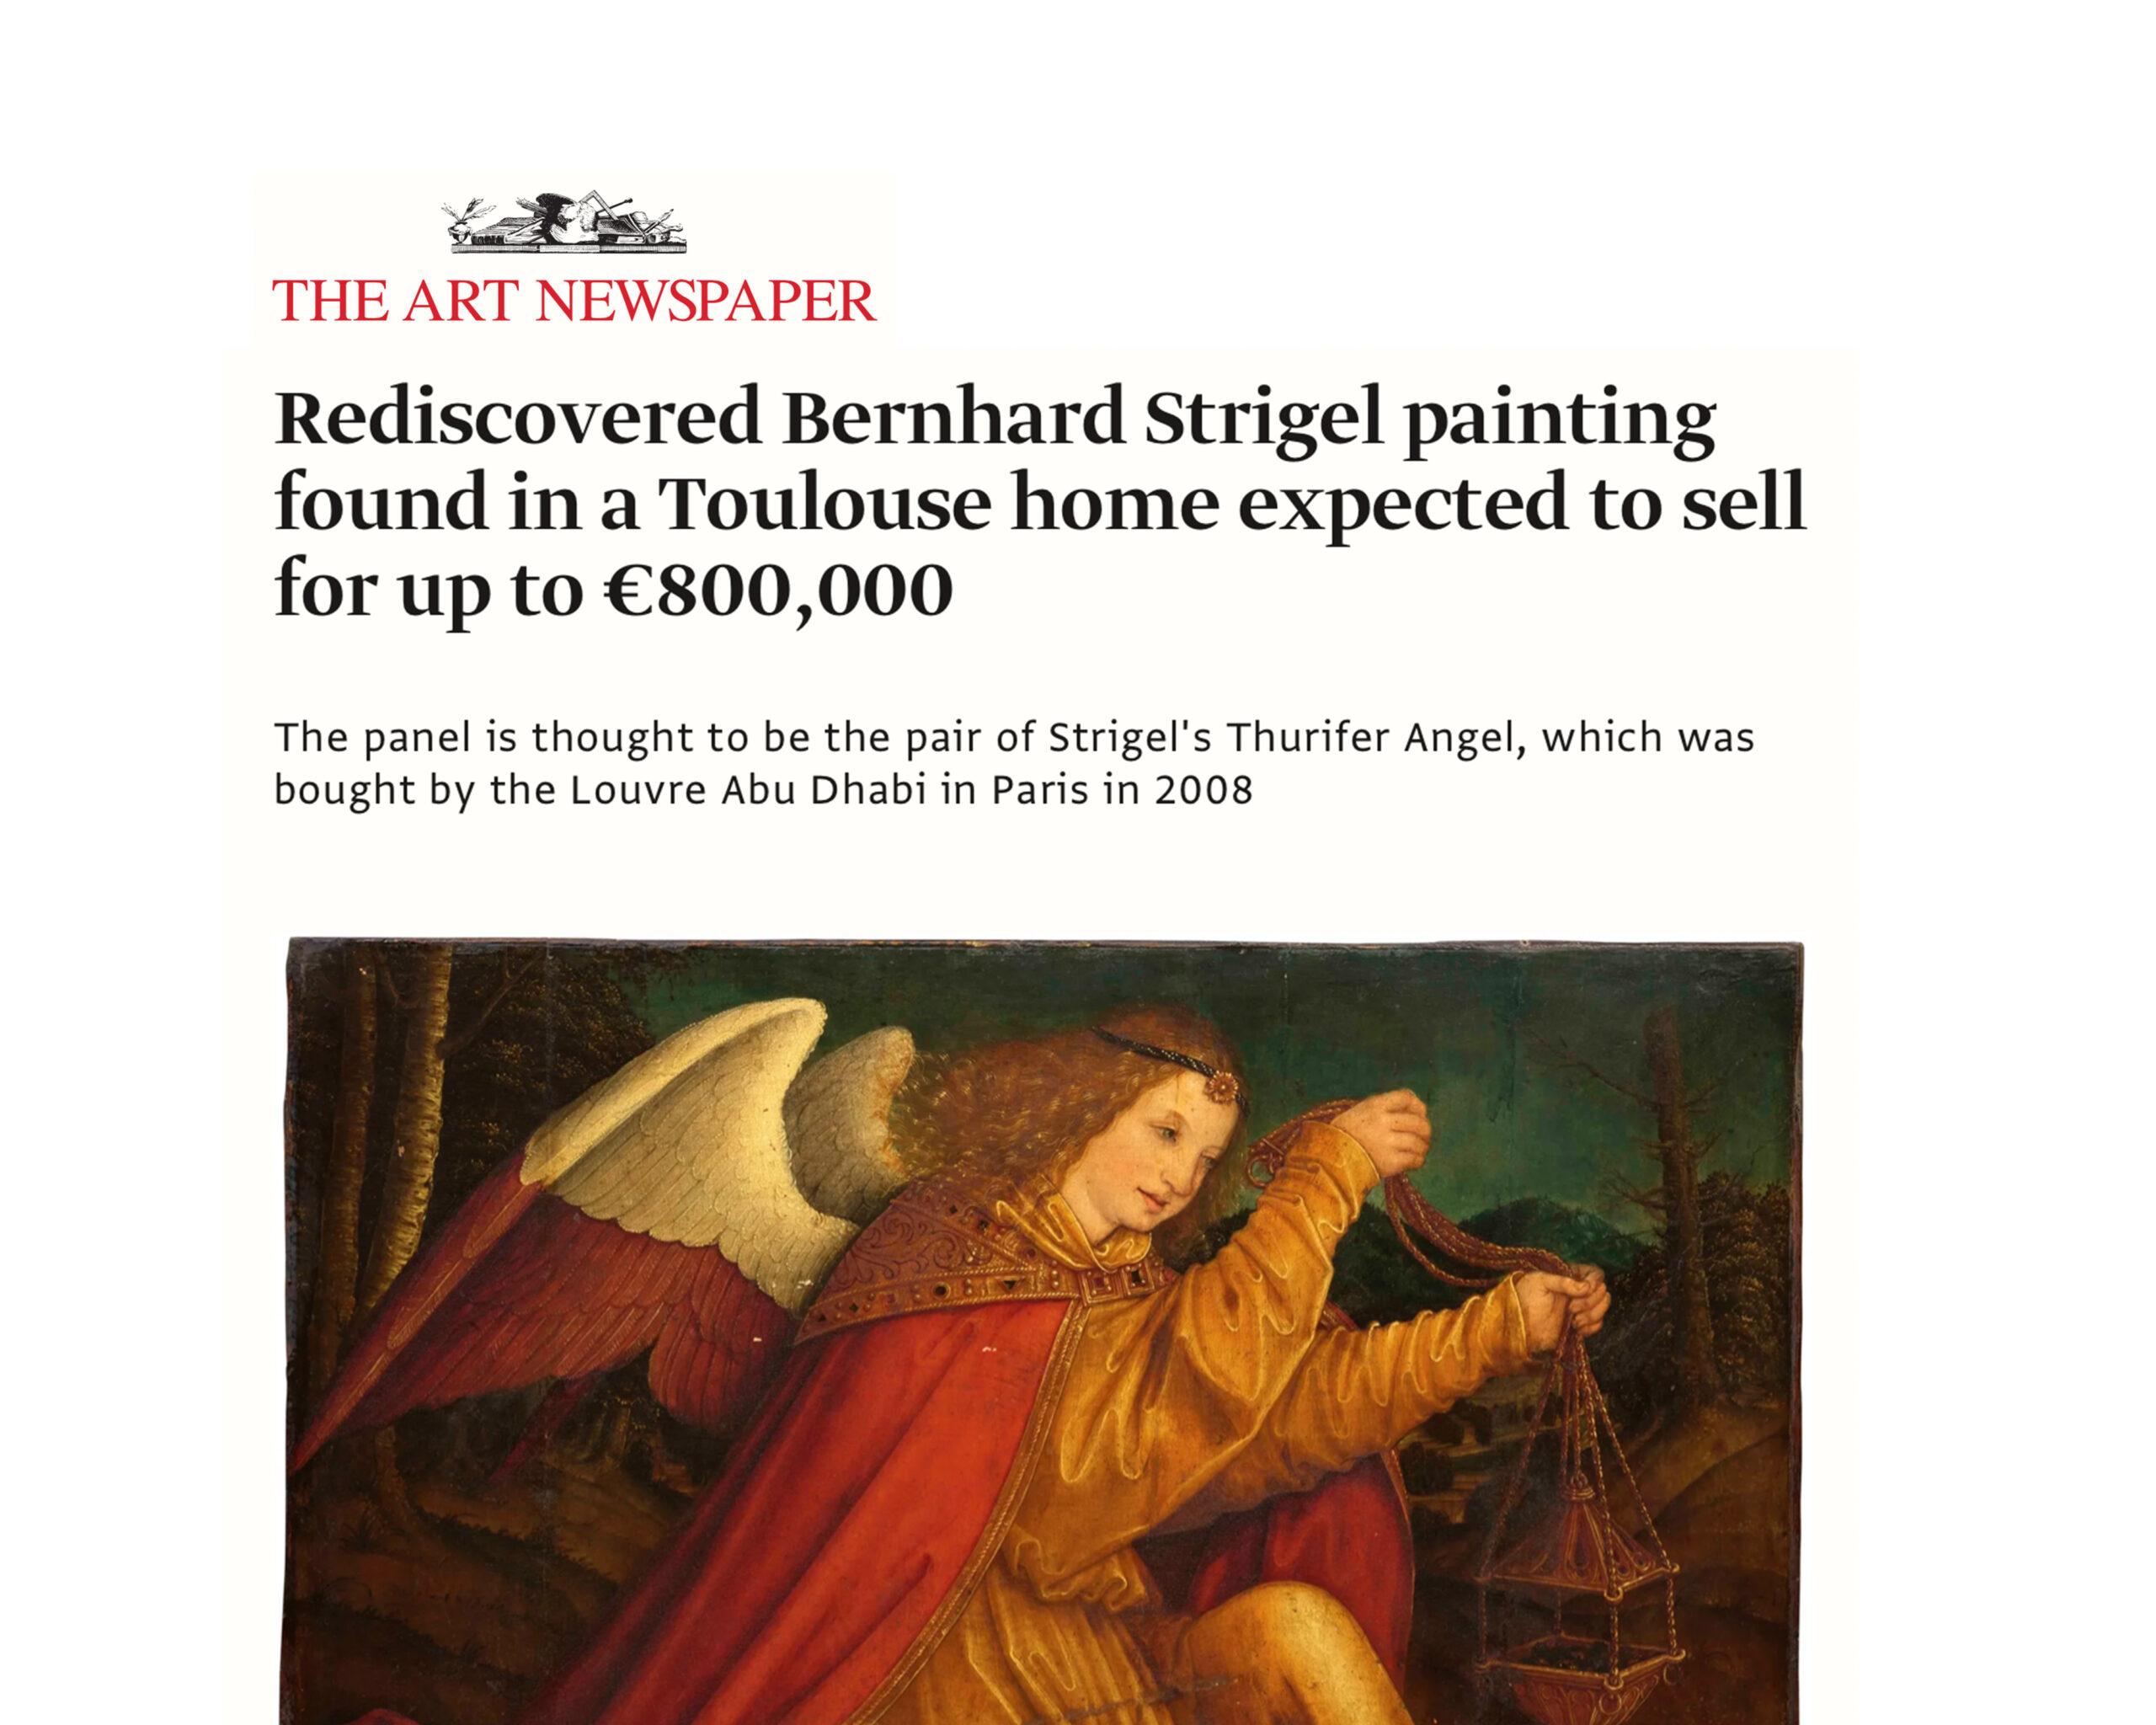 « Rediscovered in Toulouse Bernhard Strigel painting expected to sell for up to €800,000 », 7 janvier 2022